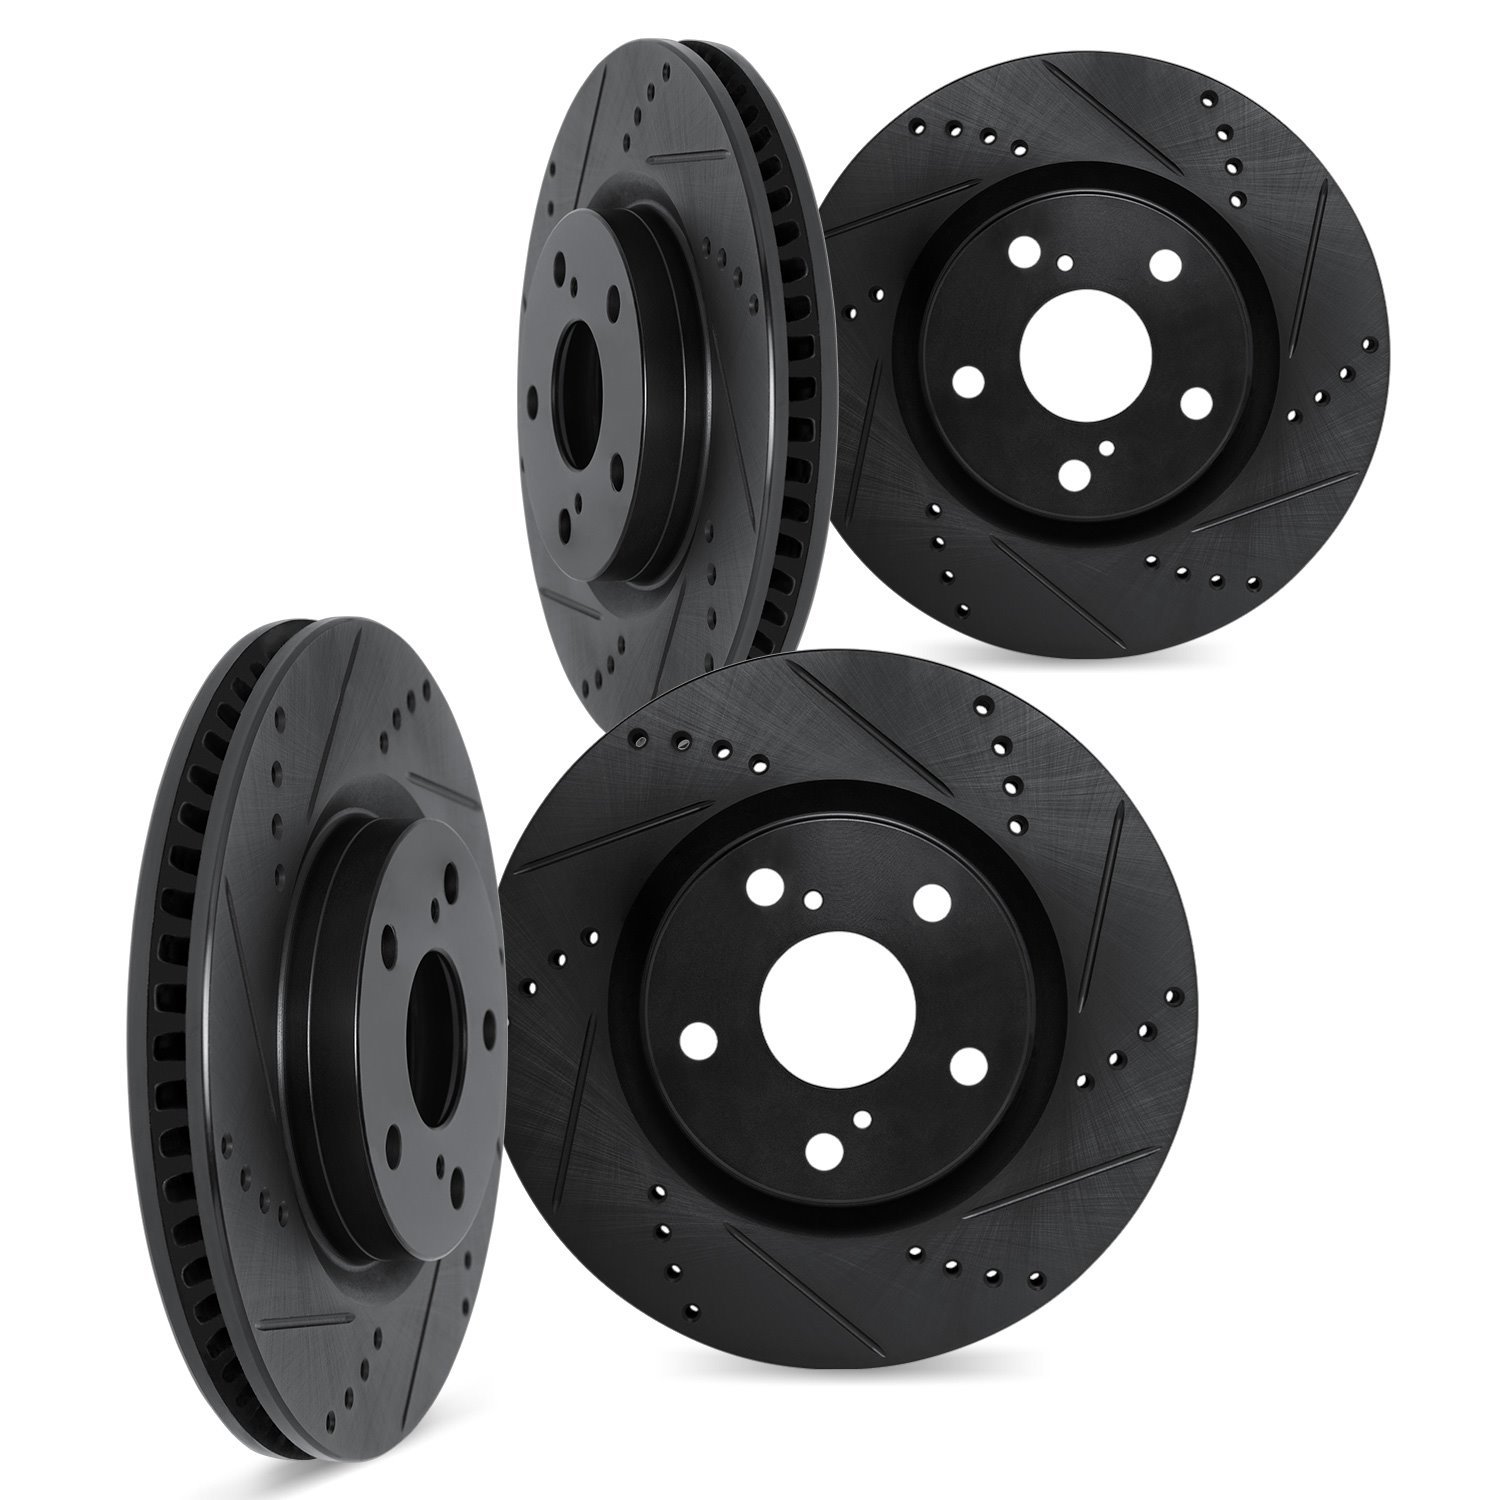 8004-68002 Drilled/Slotted Brake Rotors [Black], 2007-2015 Infiniti/Nissan, Position: Front and Rear